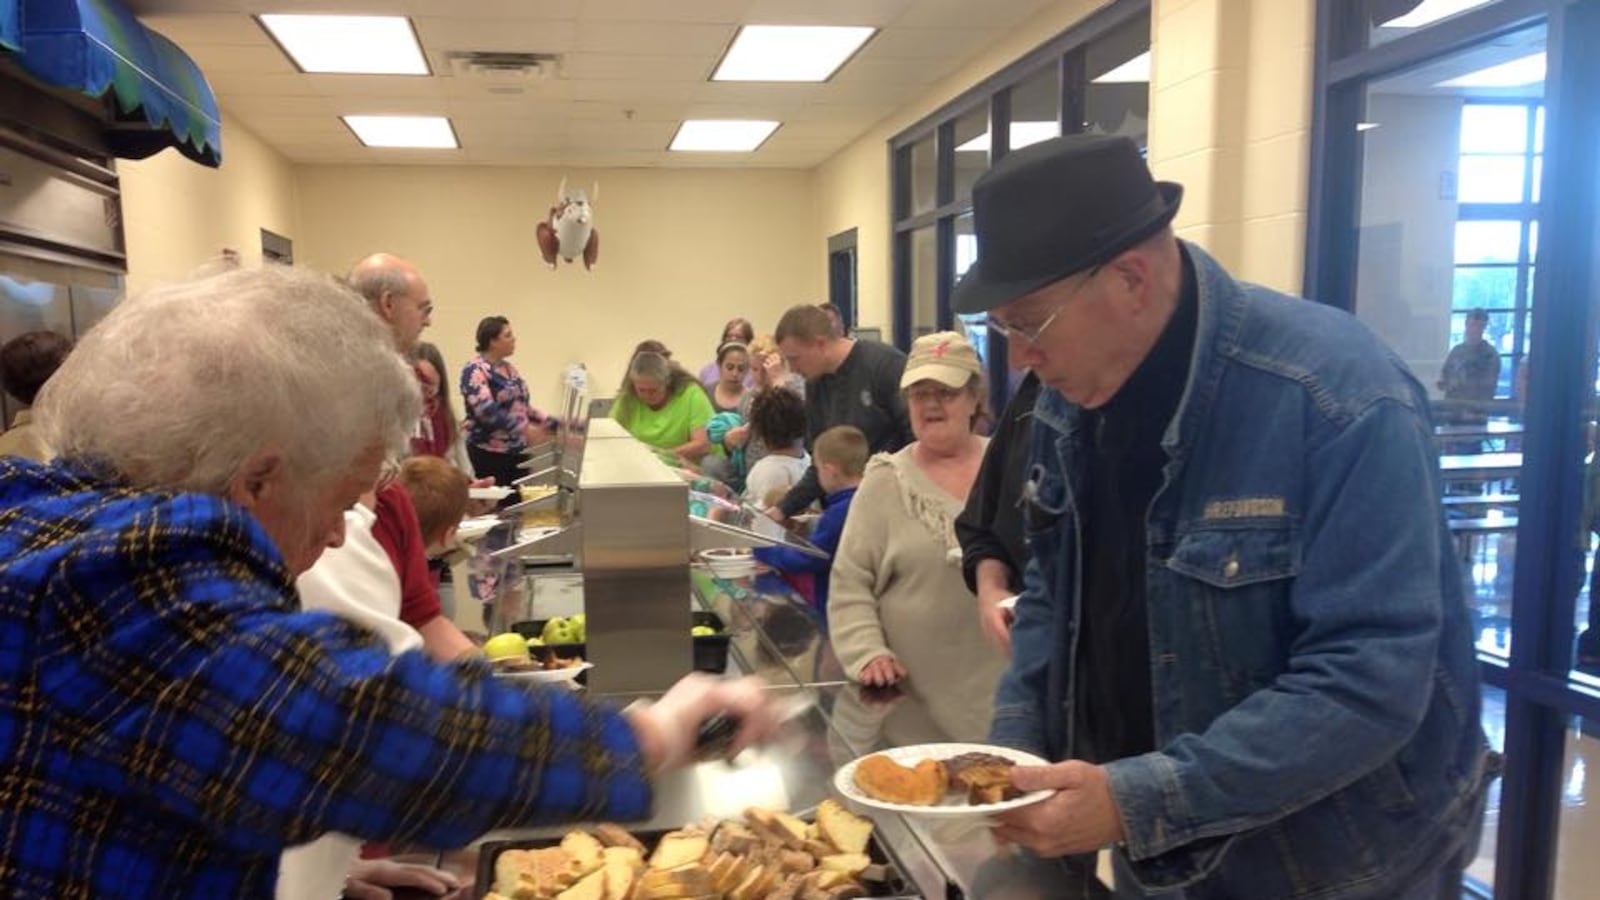 Goodwin seniors serve Tuesday lunch at the center. Next door, Stephen Decatur Elementary School also provides free dinners each week. The program is part of how the district connects with the people and organizations around them.